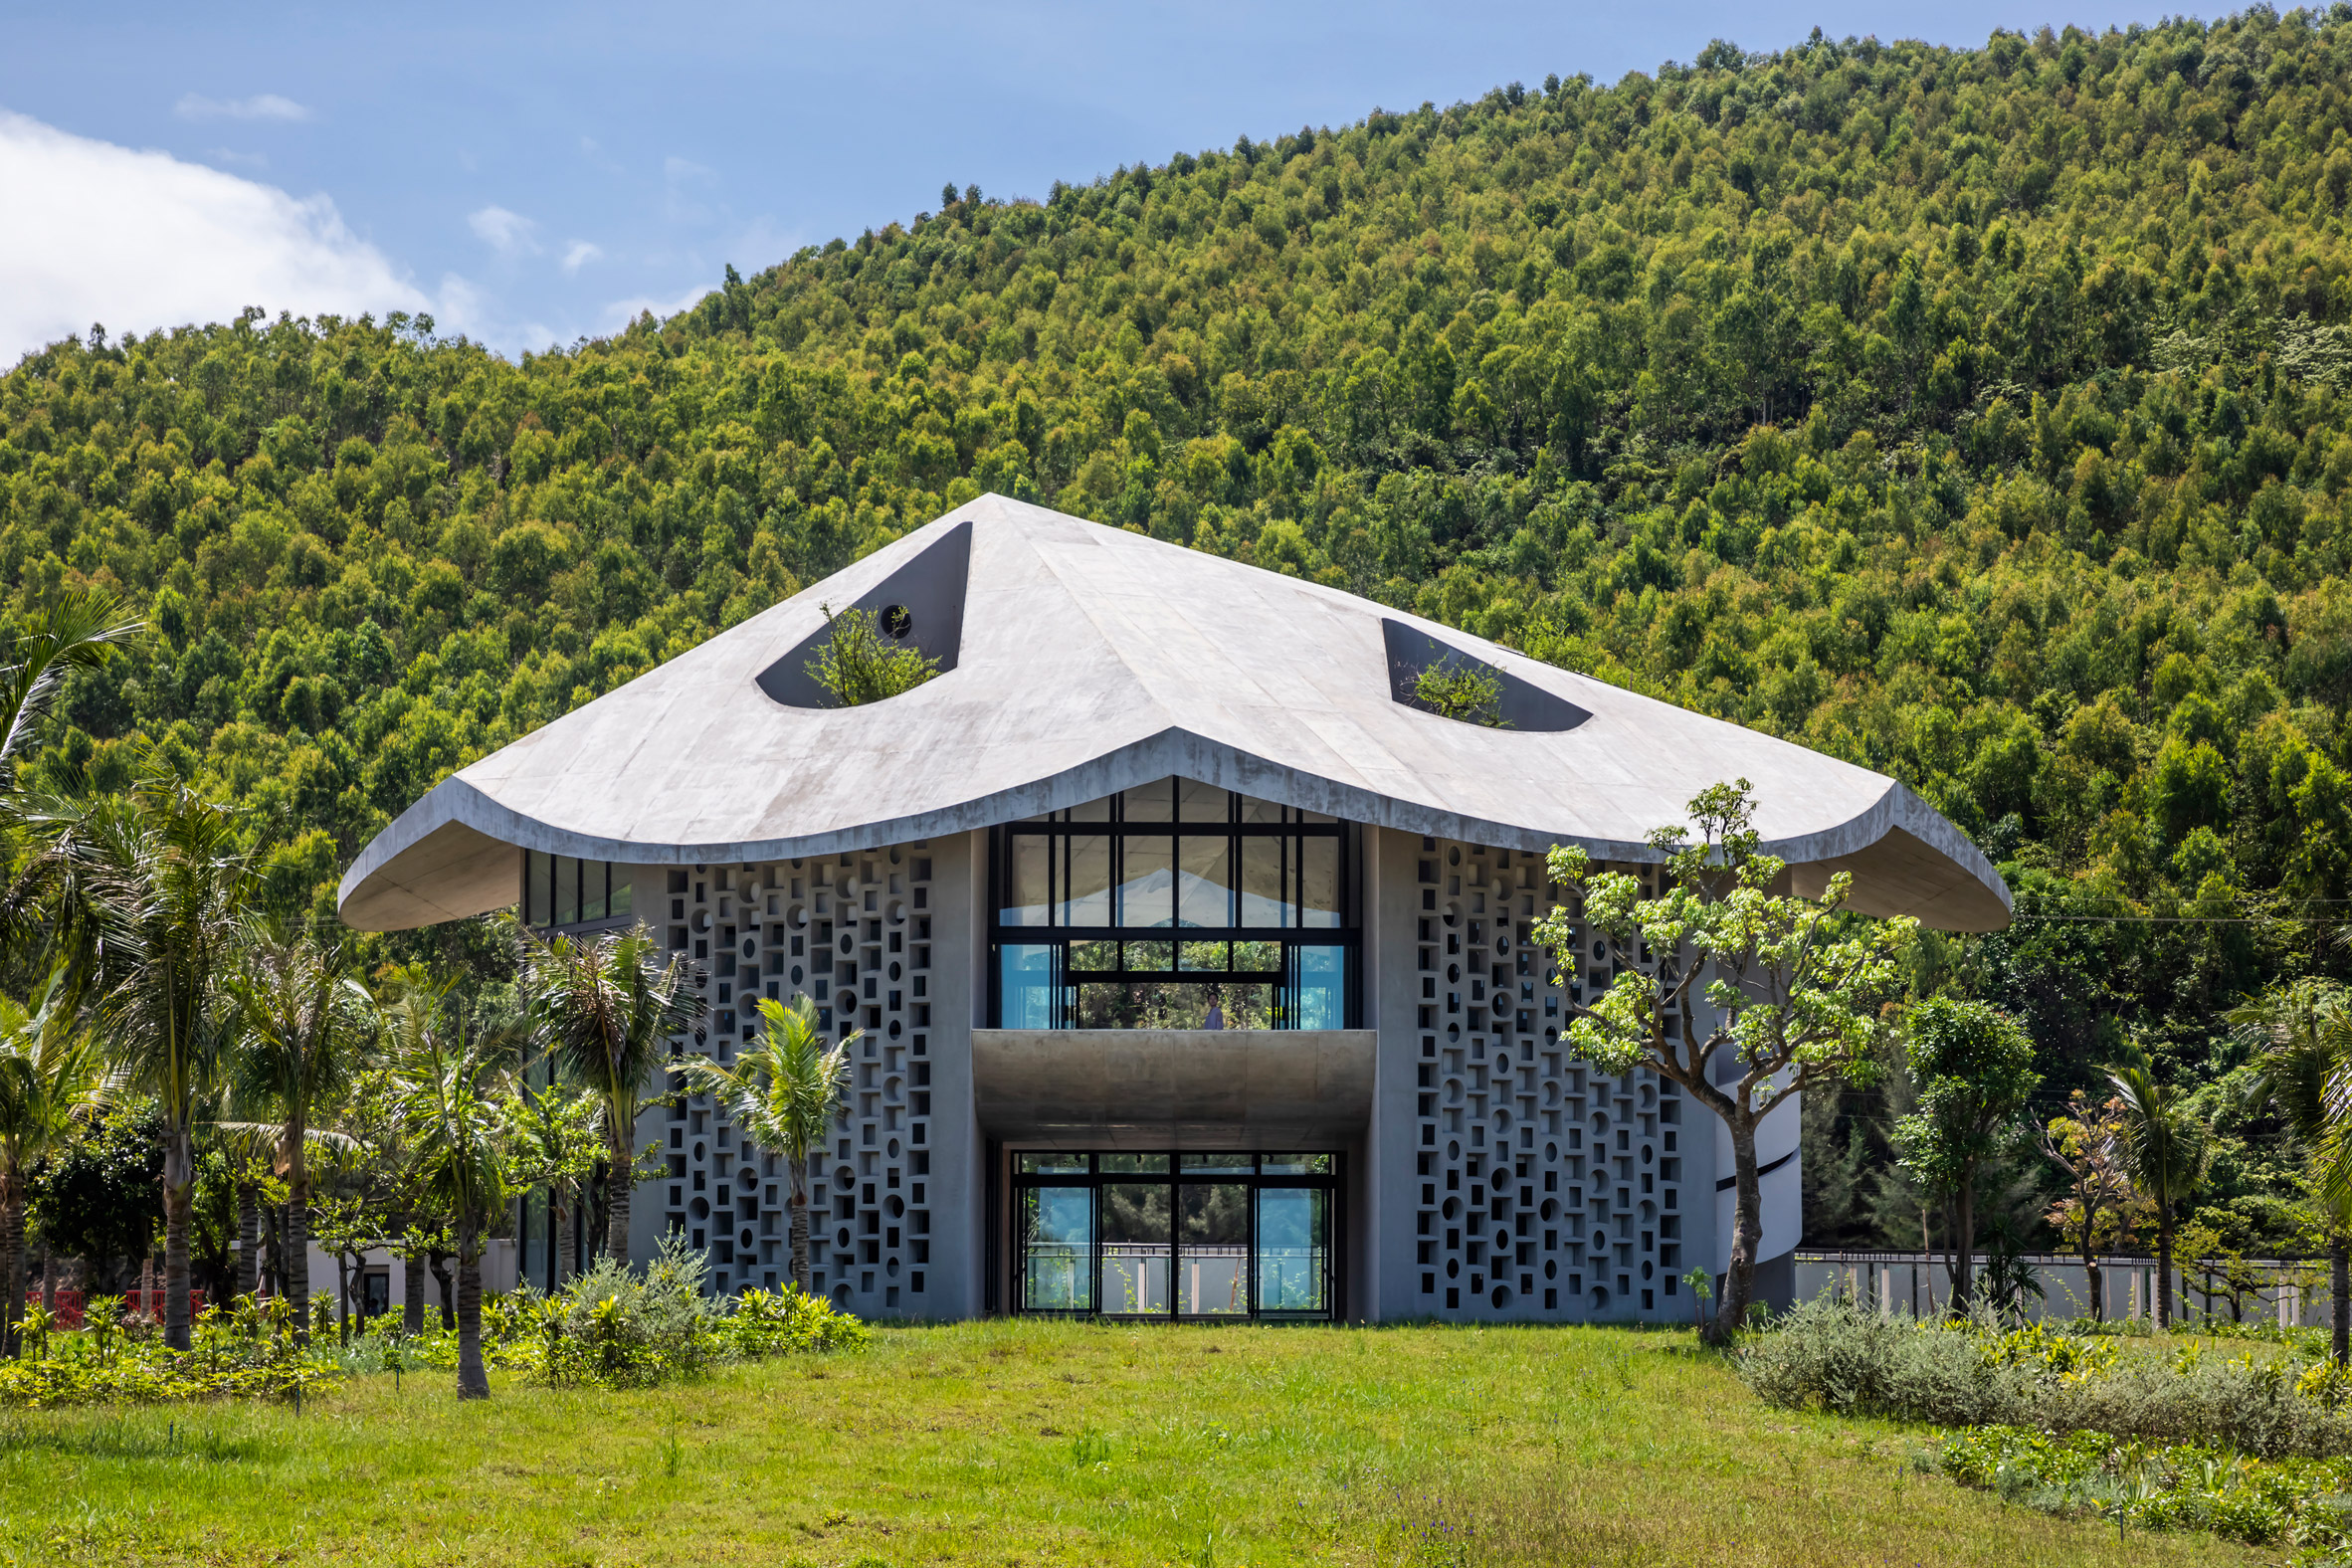 Concrete building by Inrestudio in Vietnam surrounded by tropical scenery